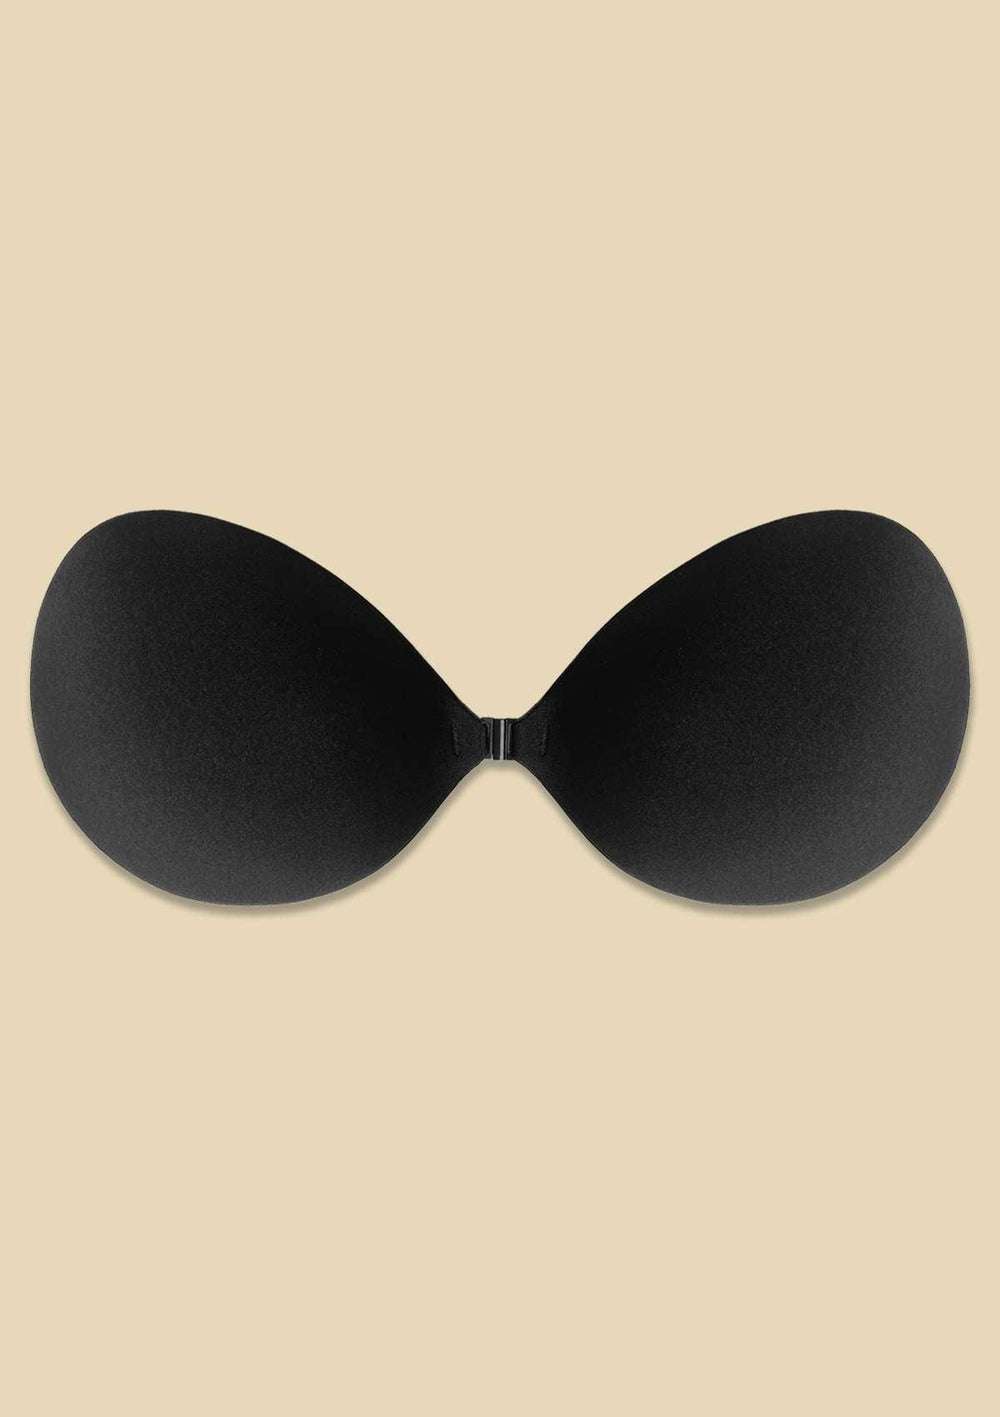 HSIA Shay Multiway Unlined Minimizer Underwire Strapless Bra